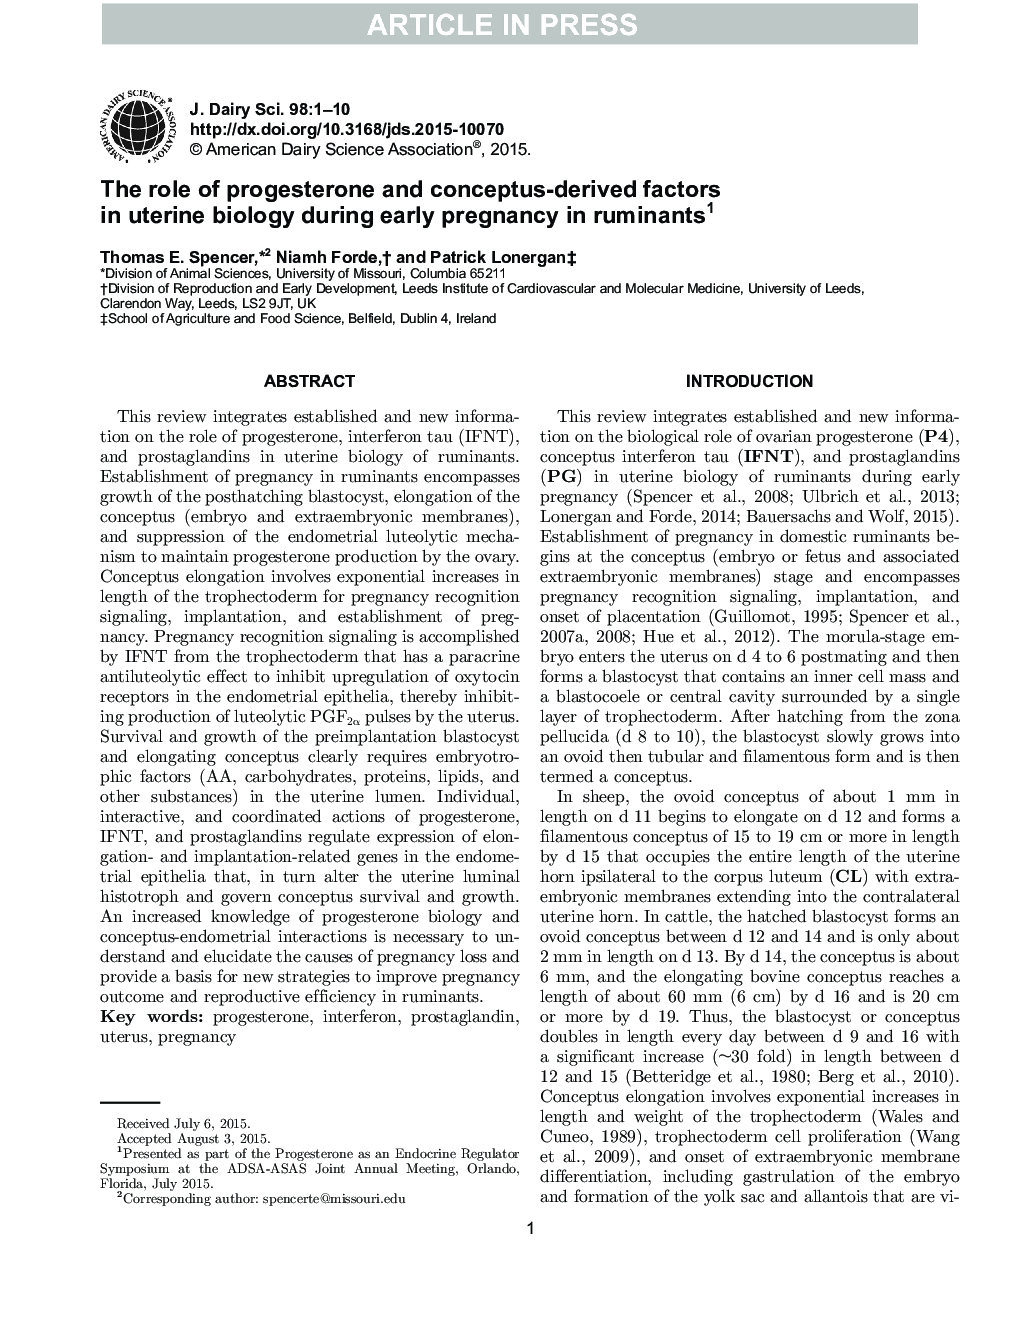 The role of progesterone and conceptus-derived factors in uterine biology during early pregnancy in ruminants1